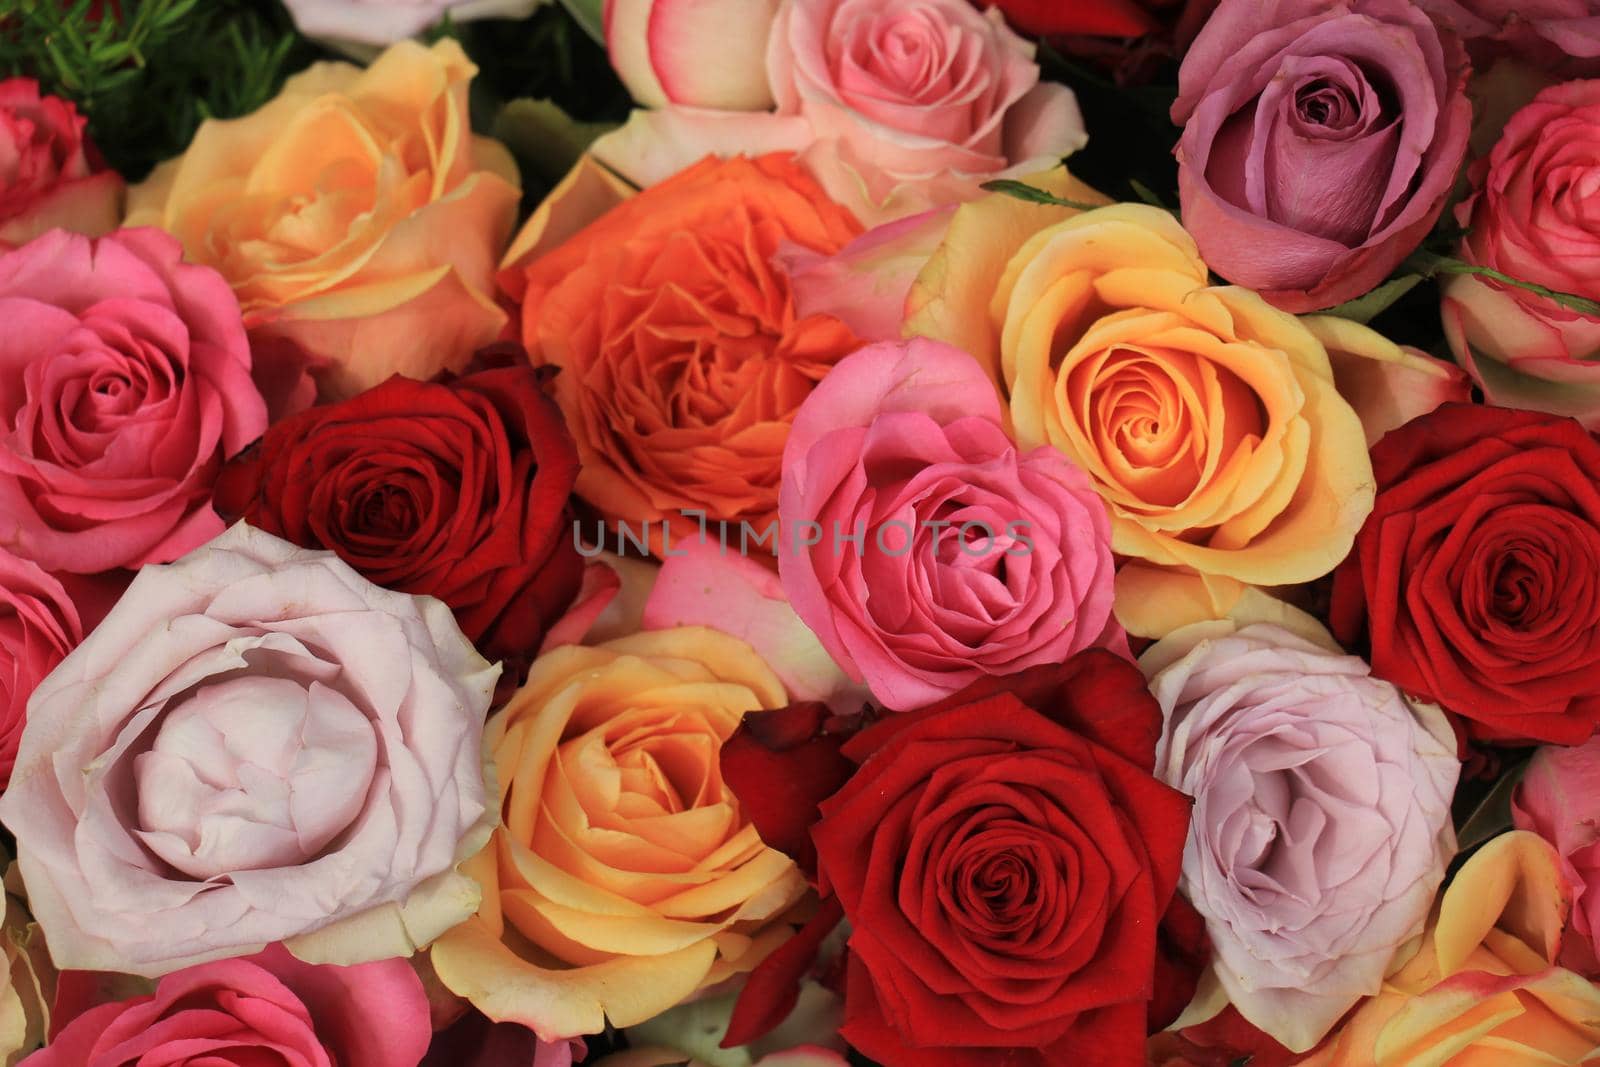 Colorful wedding roses in a floral wedding decoration